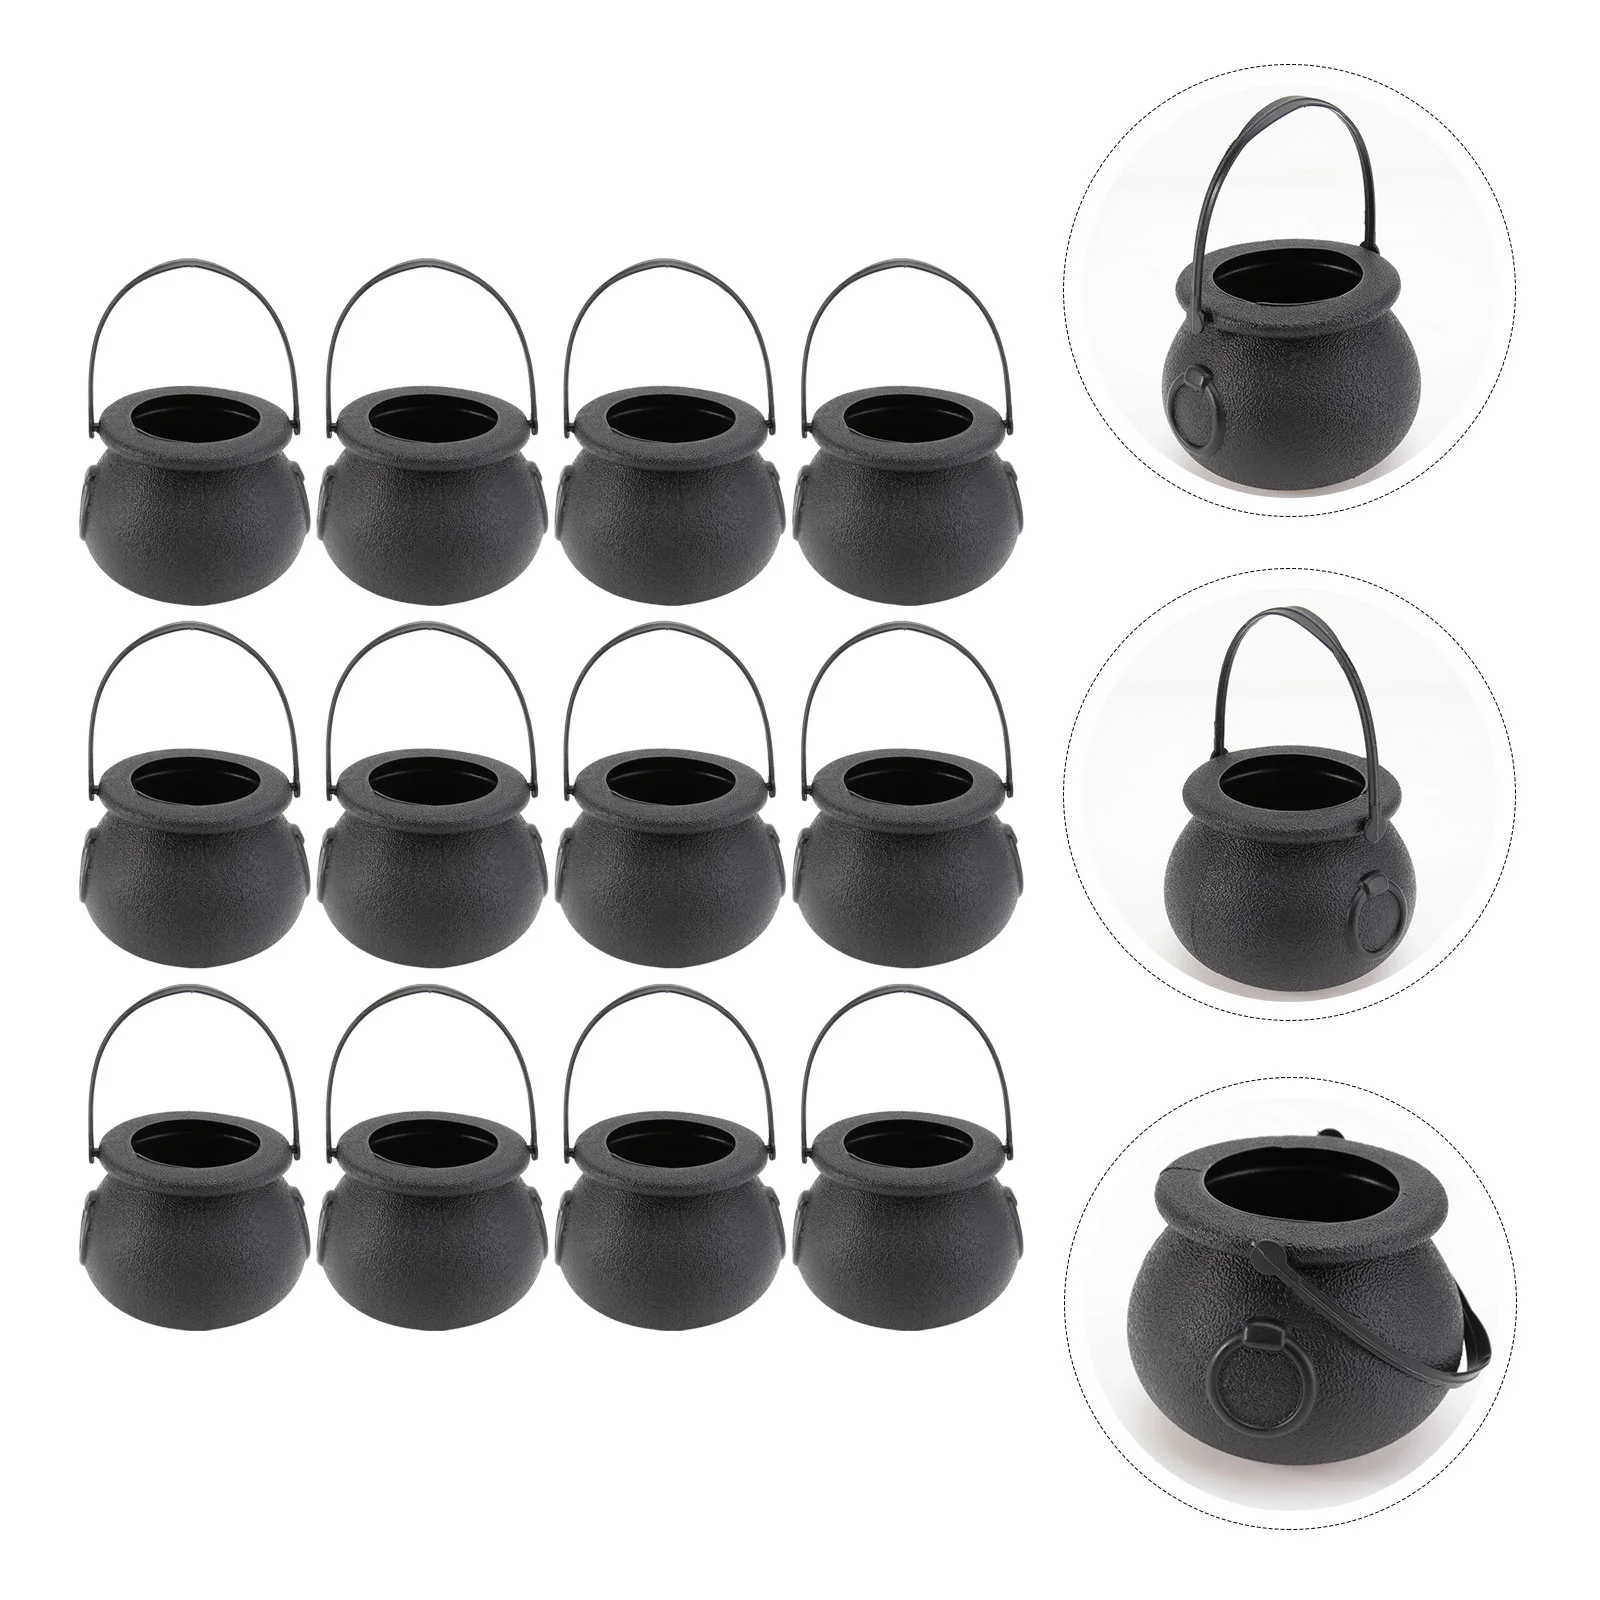 

12Pcs Black Cauldron Kettle Candy Bucket Trick- or- Treat Candy Pail Holder Candy Bowl Favor Supplies